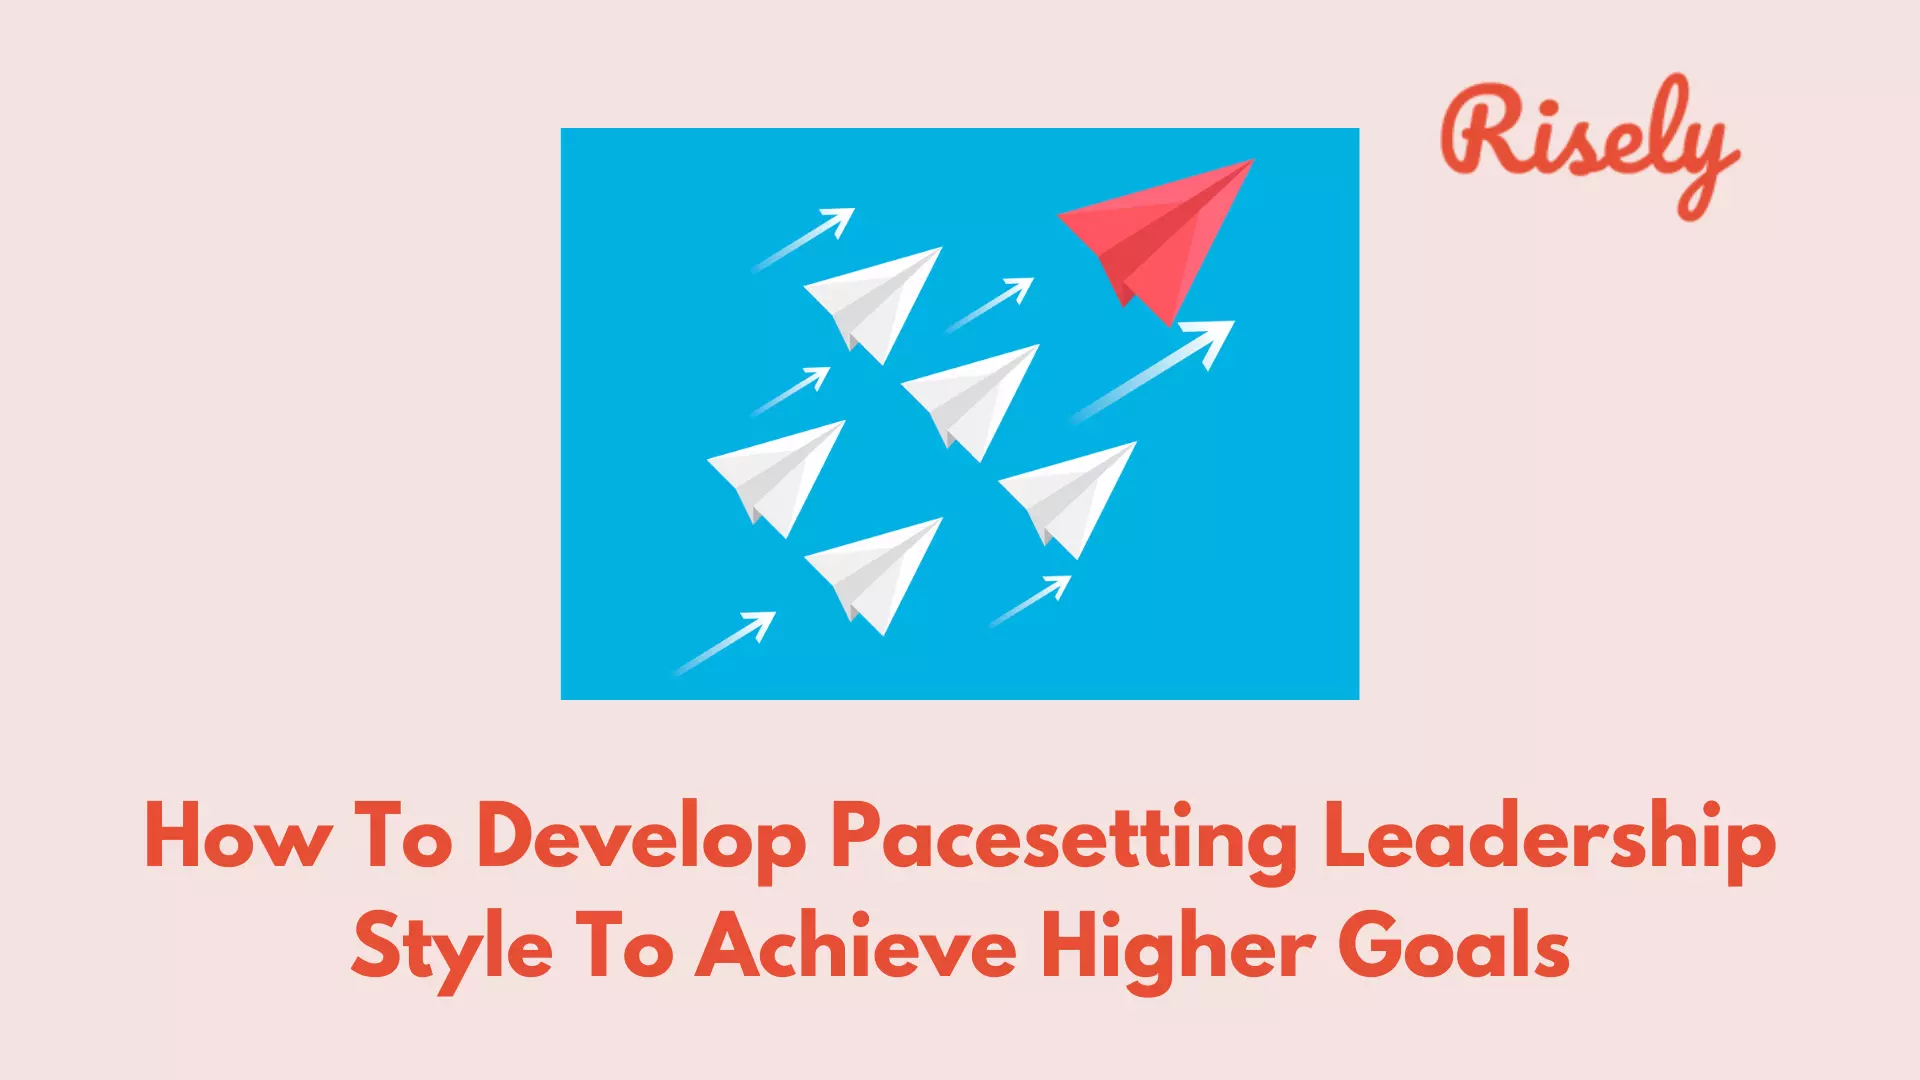 Pacesetting leadership style